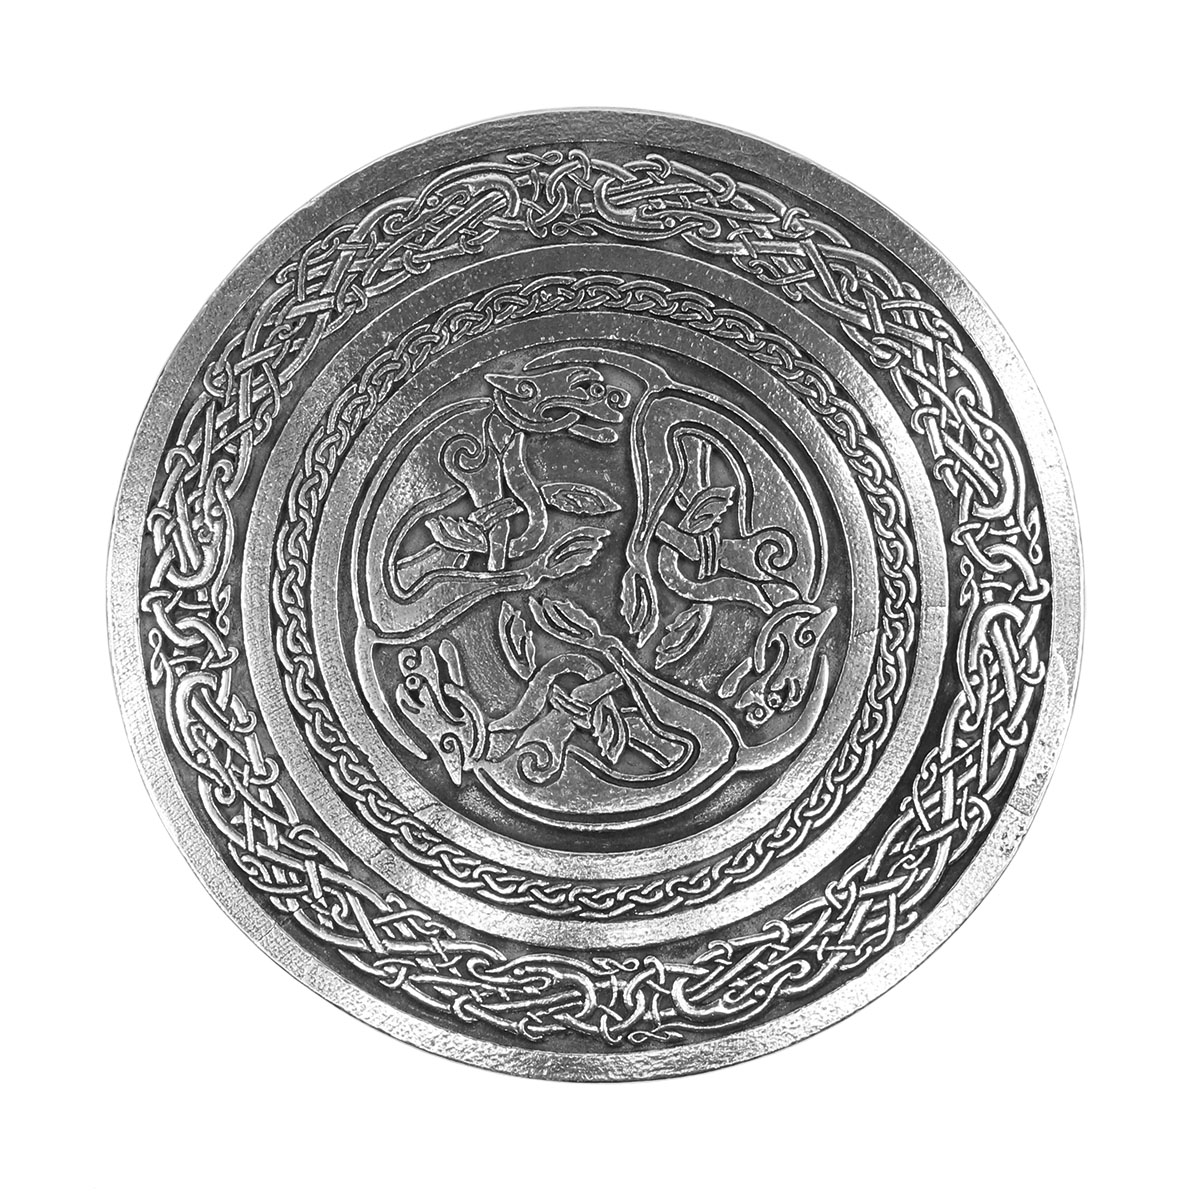 A silver plate with a Celtic Hounds Pewter Kilt Belt Buckle design on it.